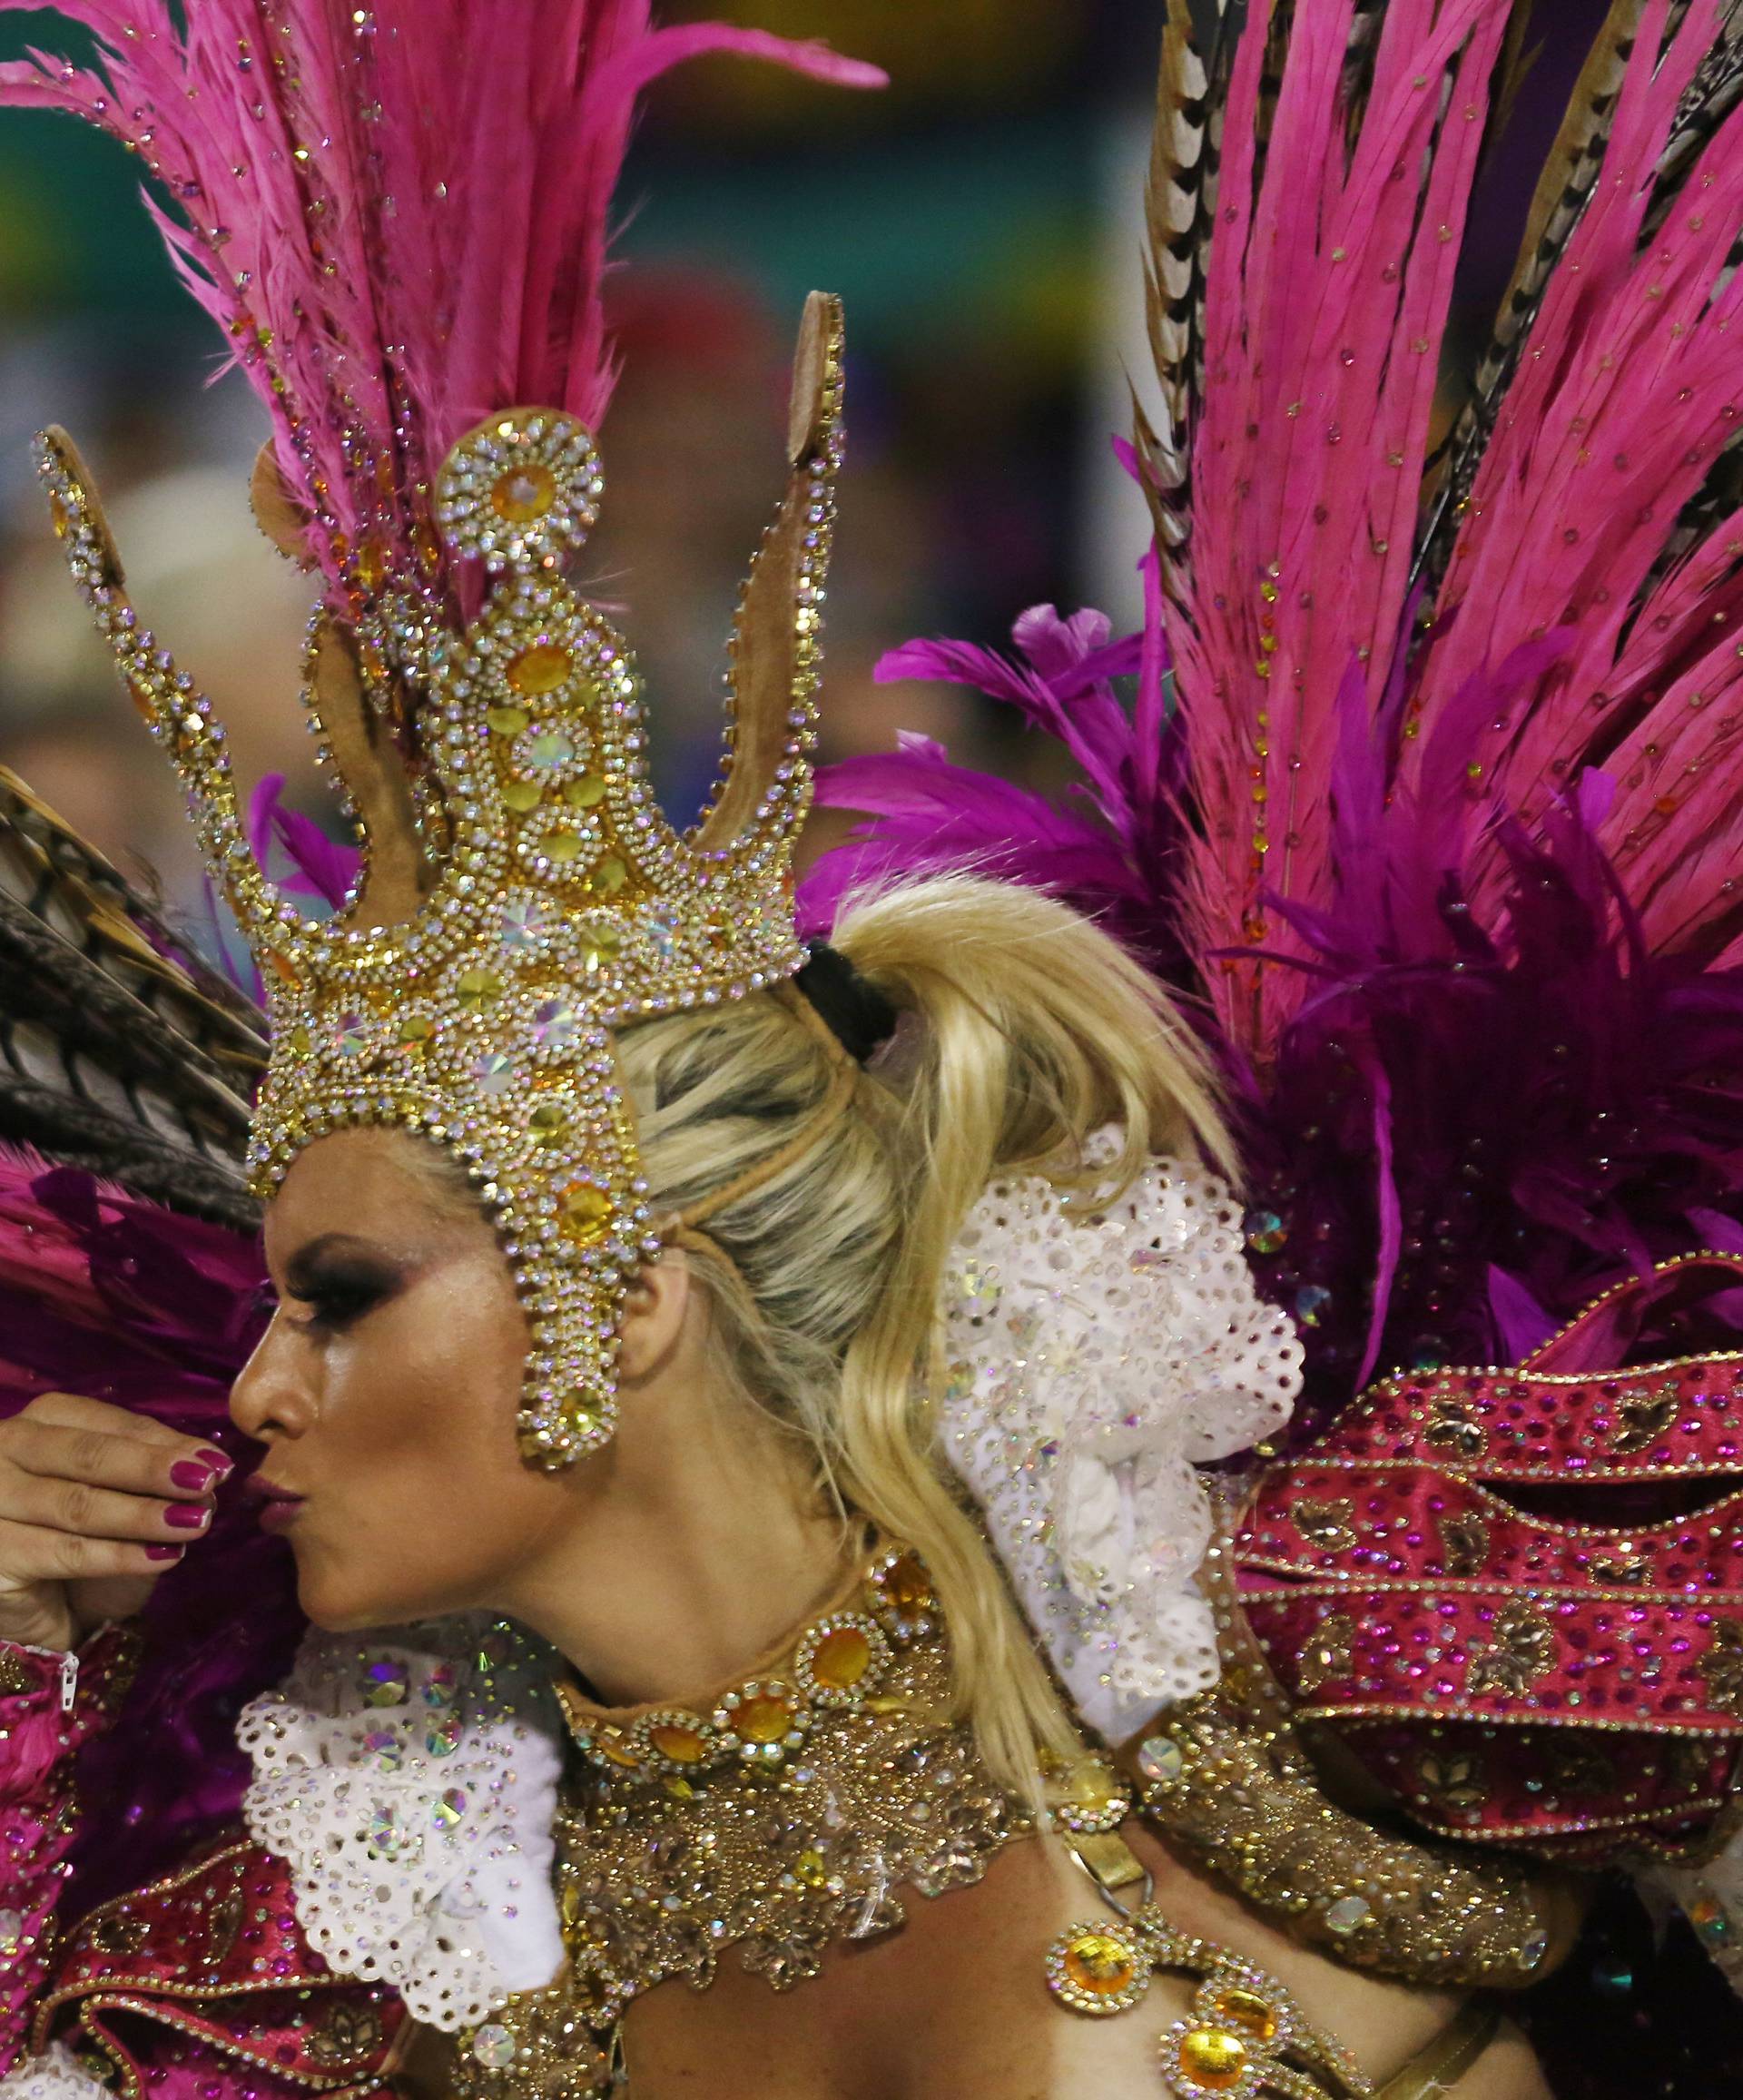 A reveller from Uniao da Ilha Samba school performs during the second night of the Carnival parade at the Sambadrome in Rio de Janeiro